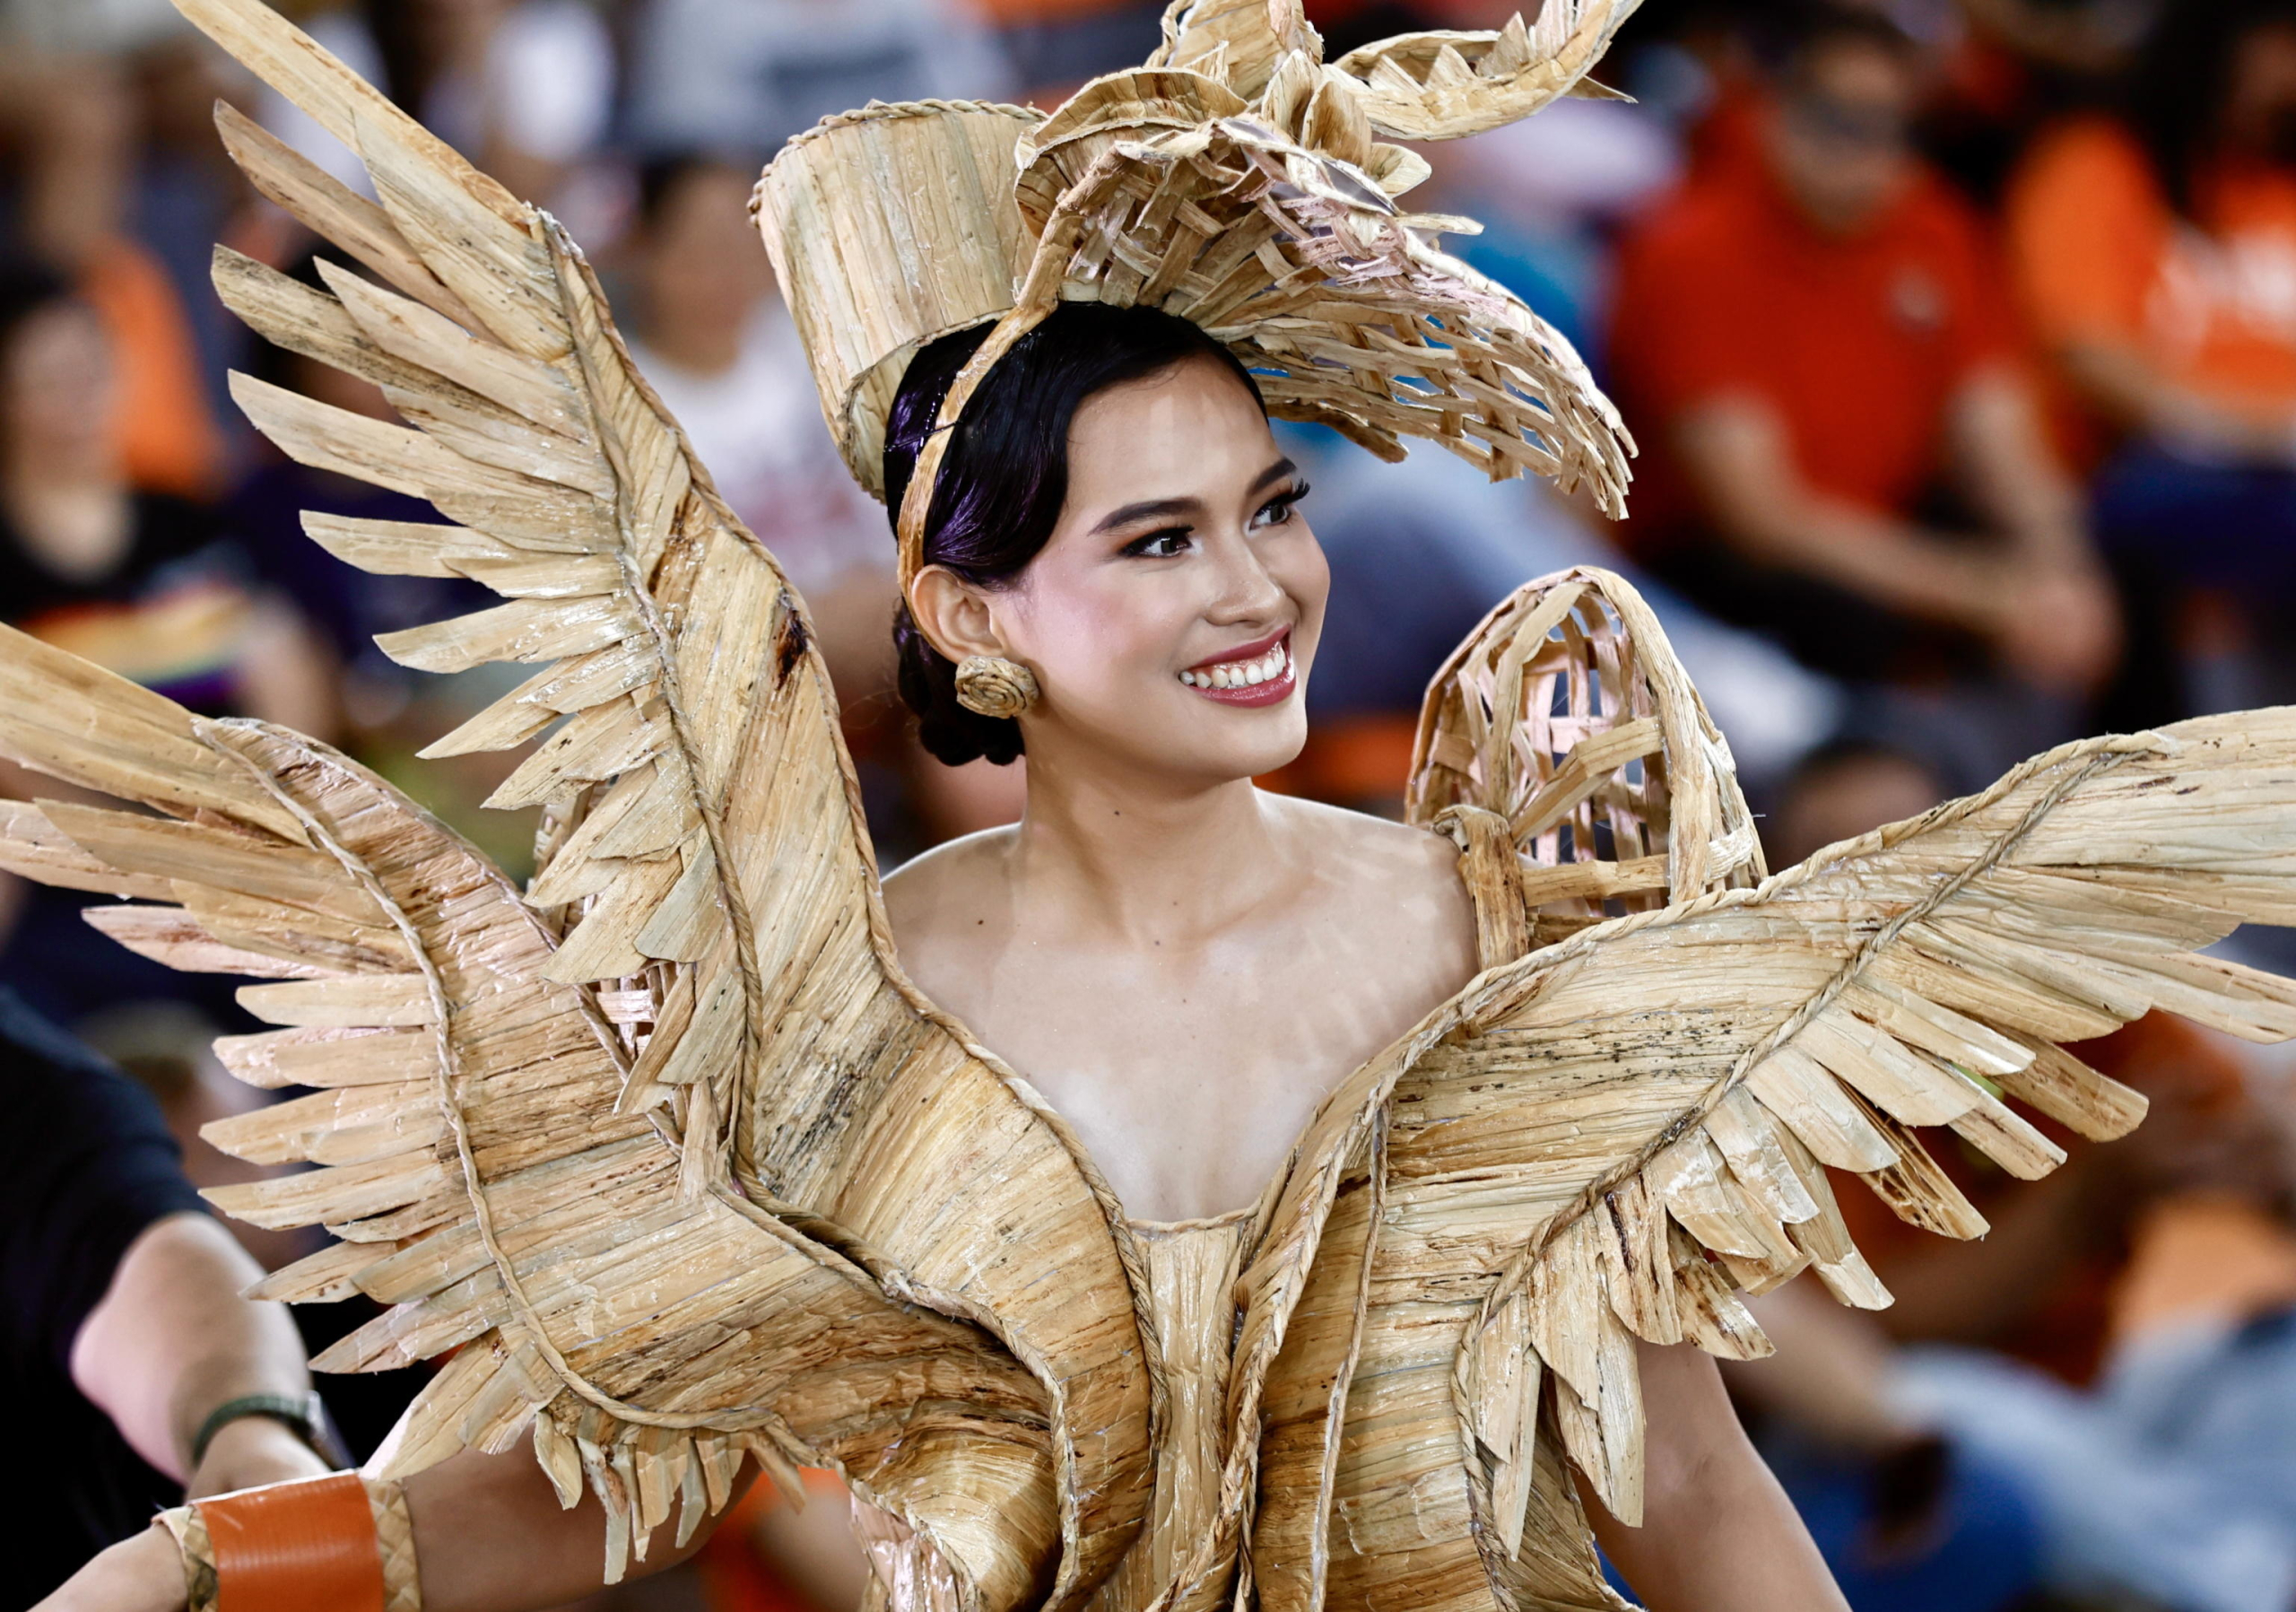 epa11529281 Irish Silades wears a gown made from dried water hyacinth stalks as she parades during the Water Lily Festival in Las Pinas city, Metro Manila, Philippines, 06 August 2024. The annual Water Lily Festival in Las Pinas city was declared by the Villar Foundation to highlight the transformation of water lilies from aquatic nuisances to valuable resources. Through the 'Water Lily Weaving Project', the foundation turns these plants into handicrafts, creating livelihoods and aiding community rehabilitation. During the festival, villagers parade in traditional costumes made from dried water lilies, showcasing the project's success and promoting the benefits of water lily-based livelihoods for local residents.  EPA/FRANCIS R. MALASIG